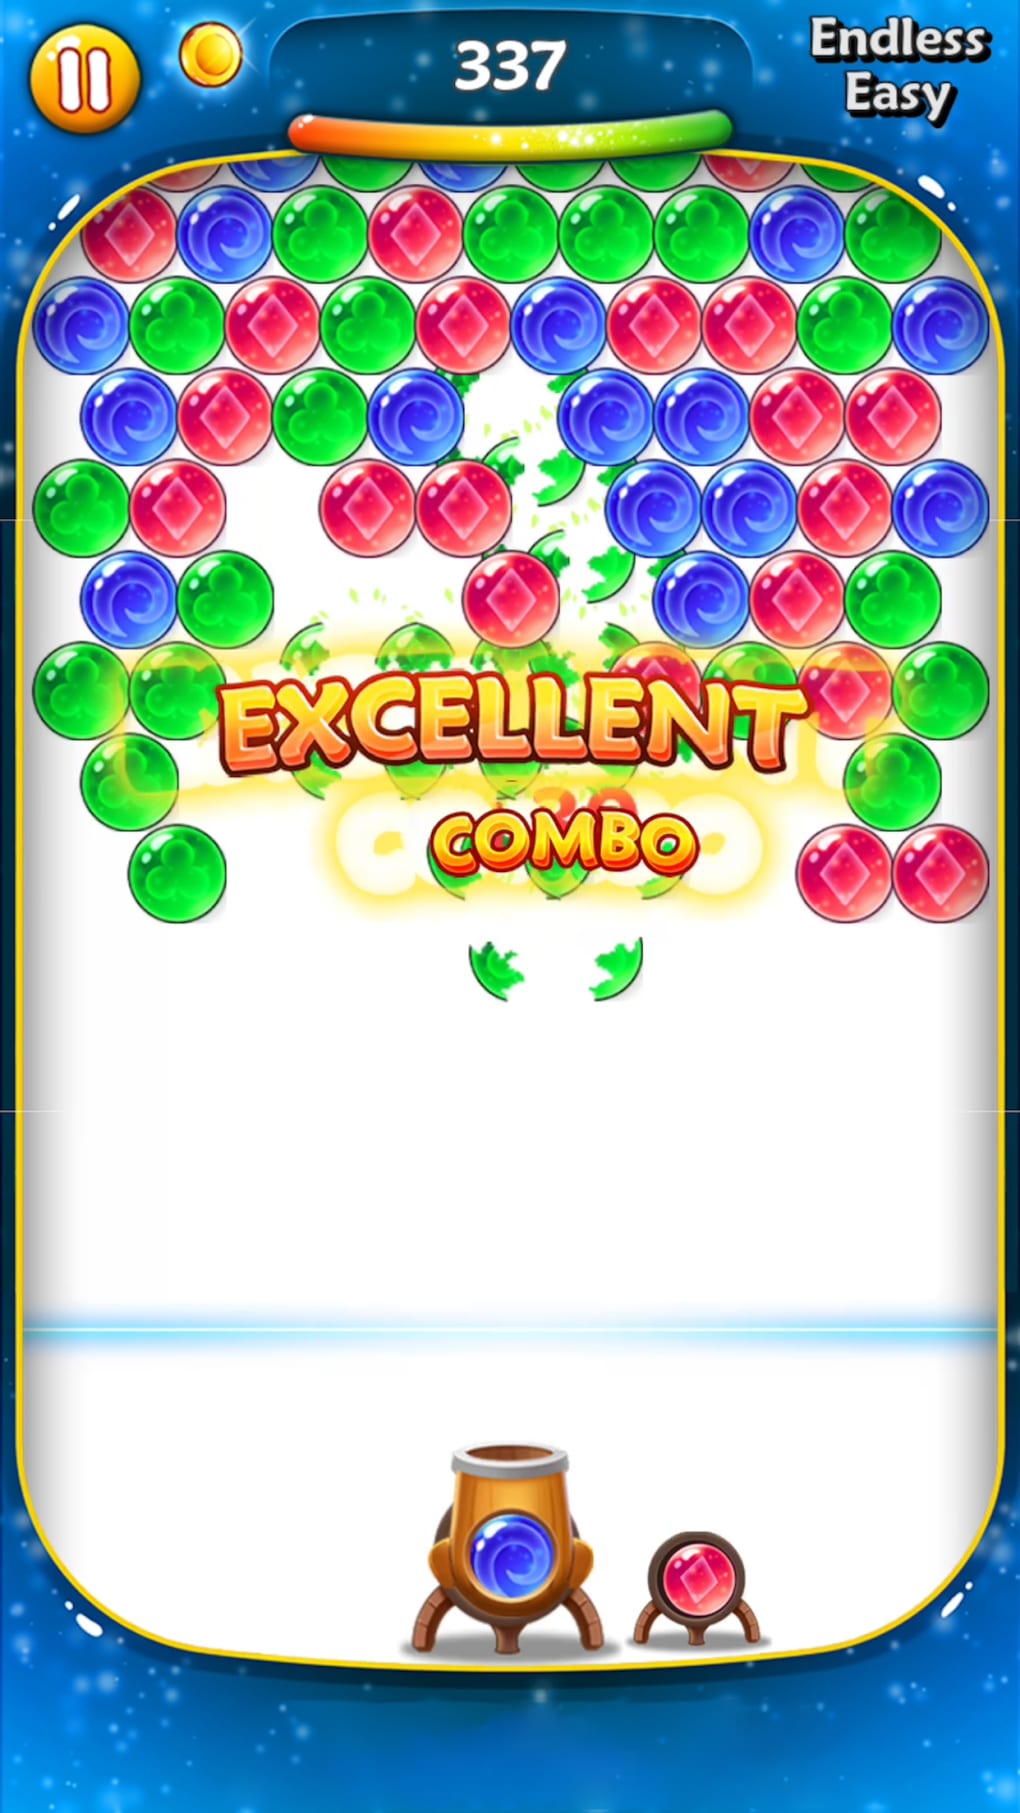 Shoot Bubble Game - Microsoft Apps